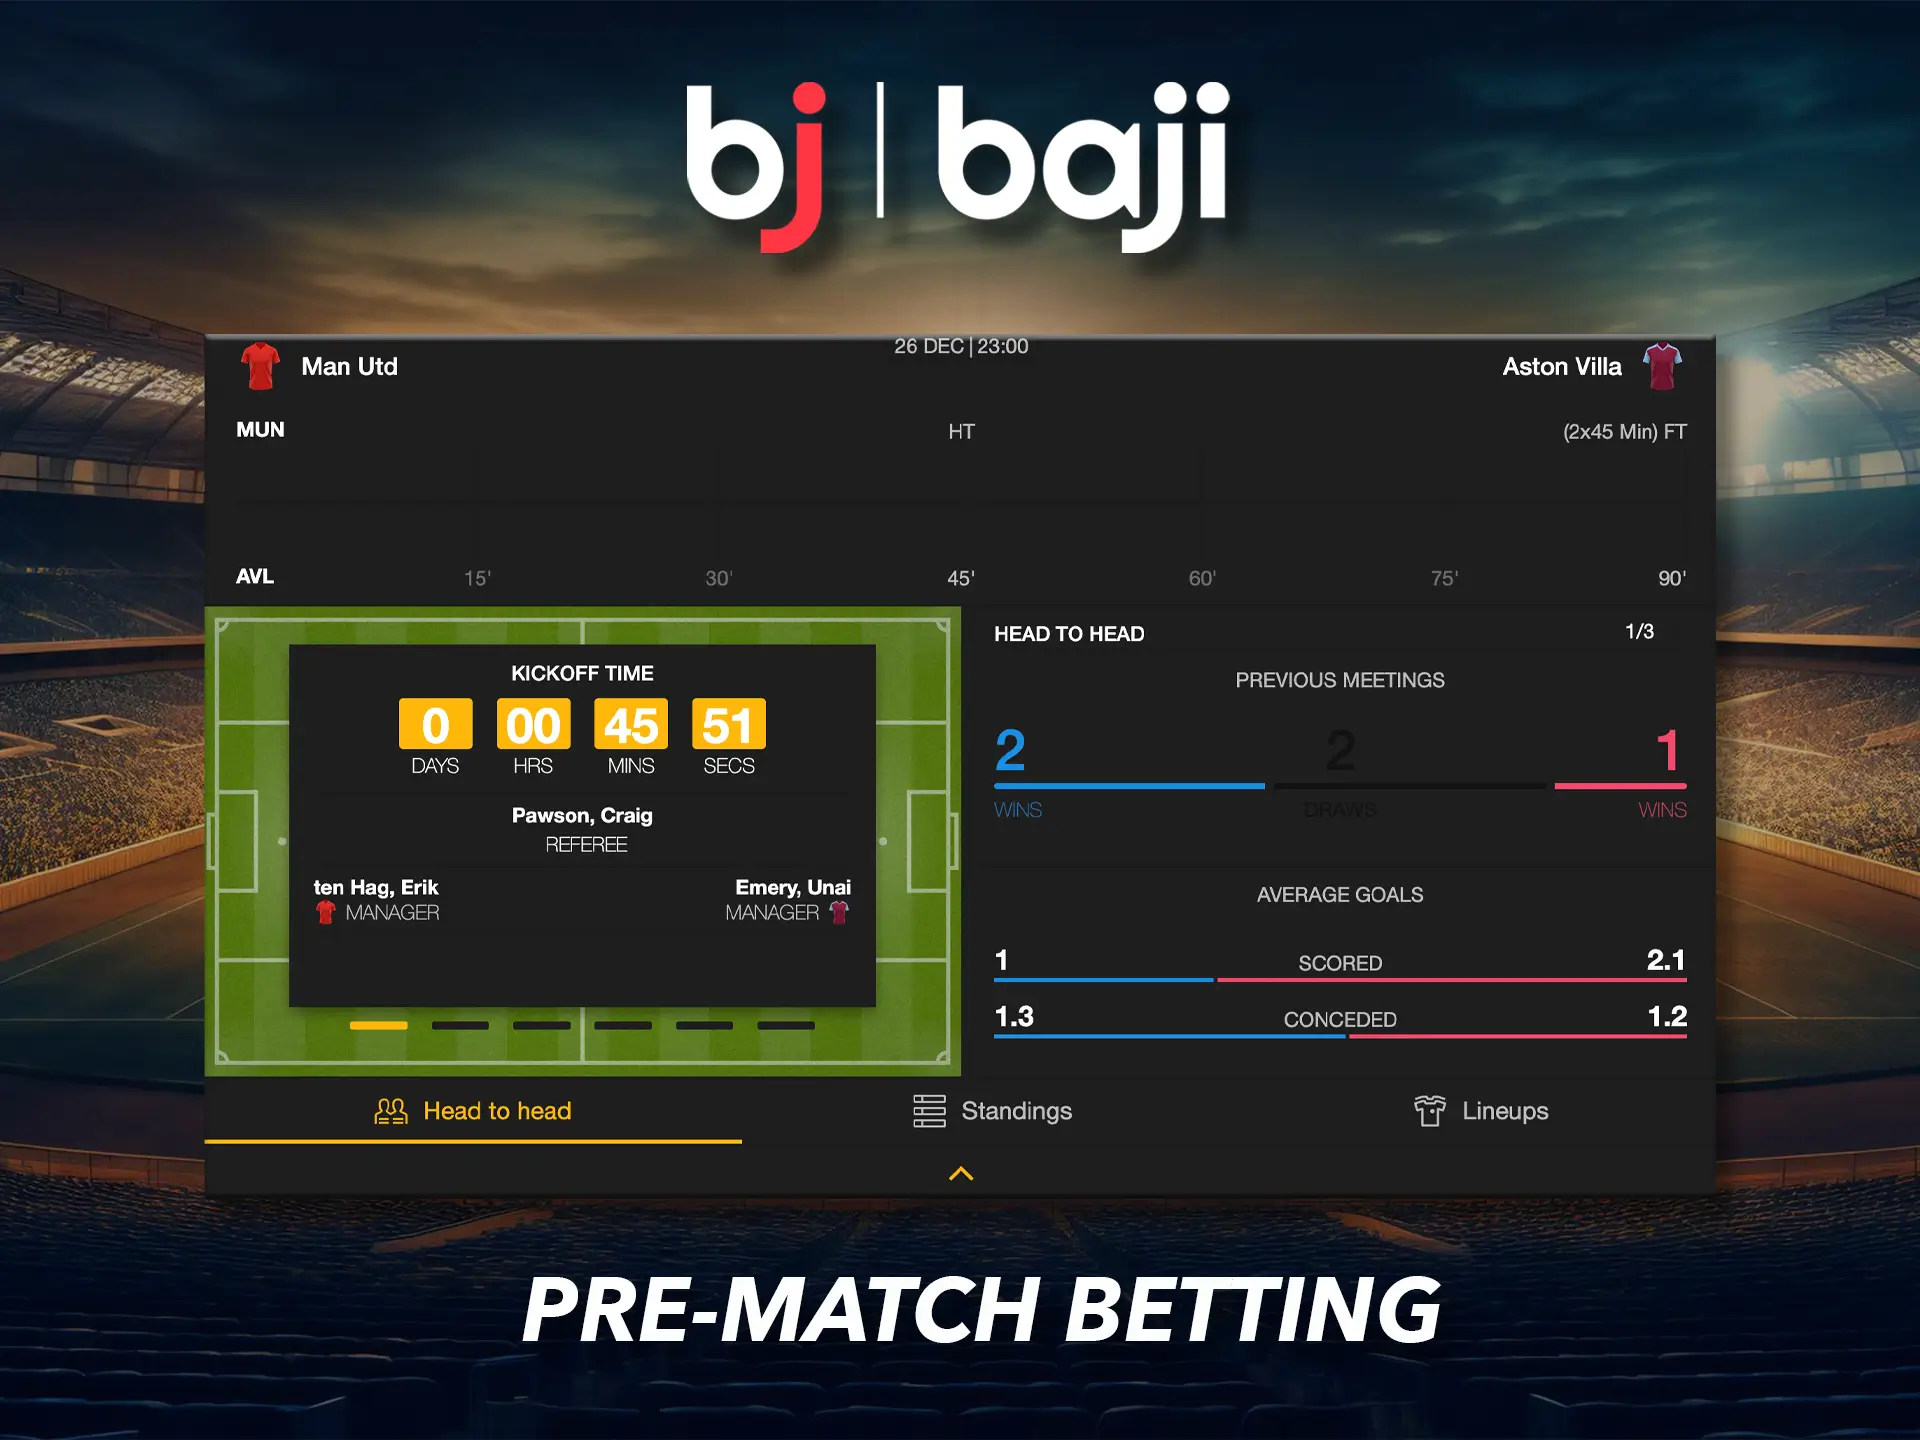 Place your bets at Baji before the match starts and get good winnings.